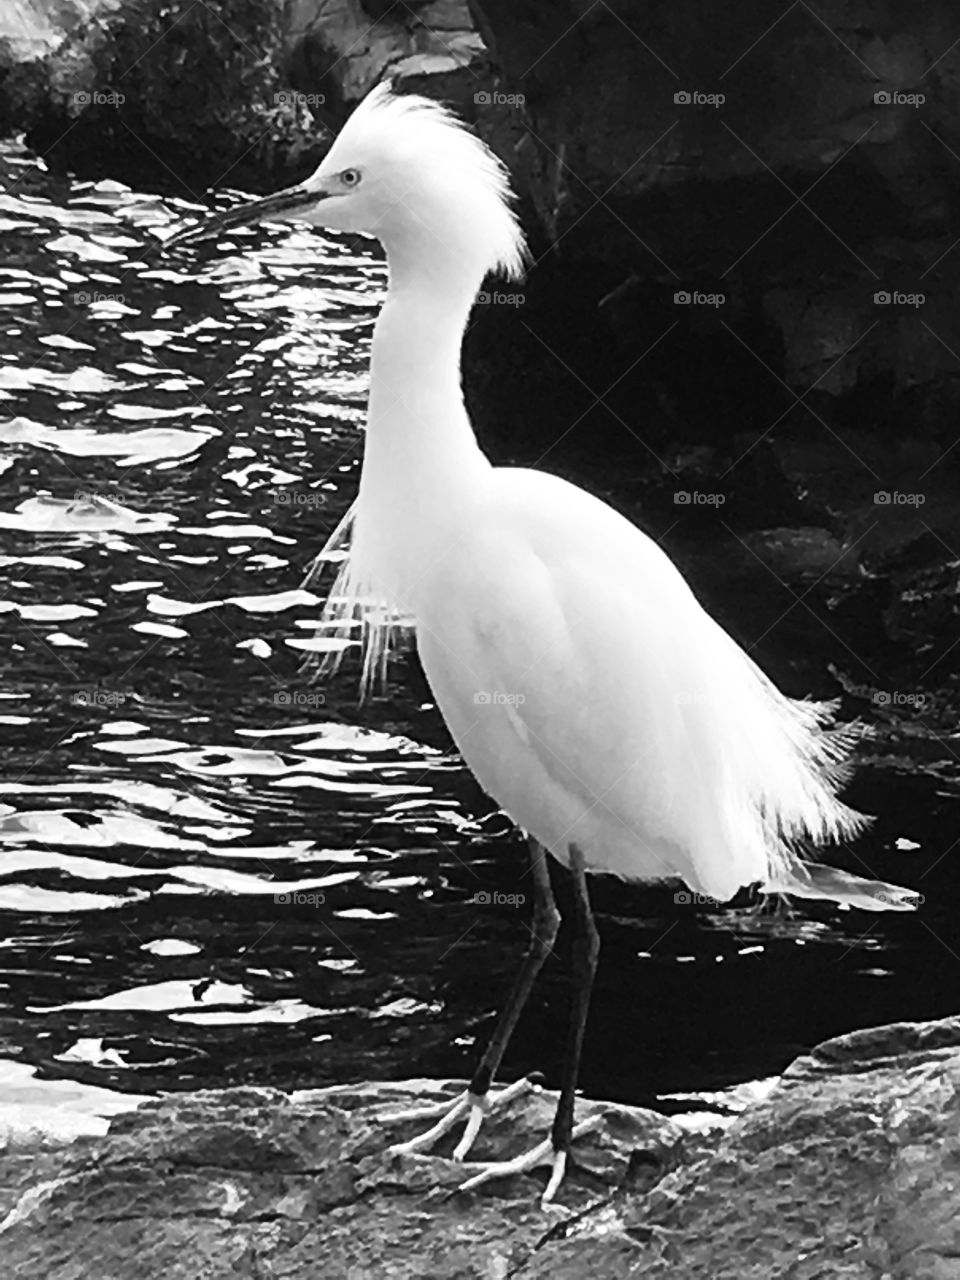 White Florida Heron at SeaWorld Orlando in black and white with ruffled feathers 